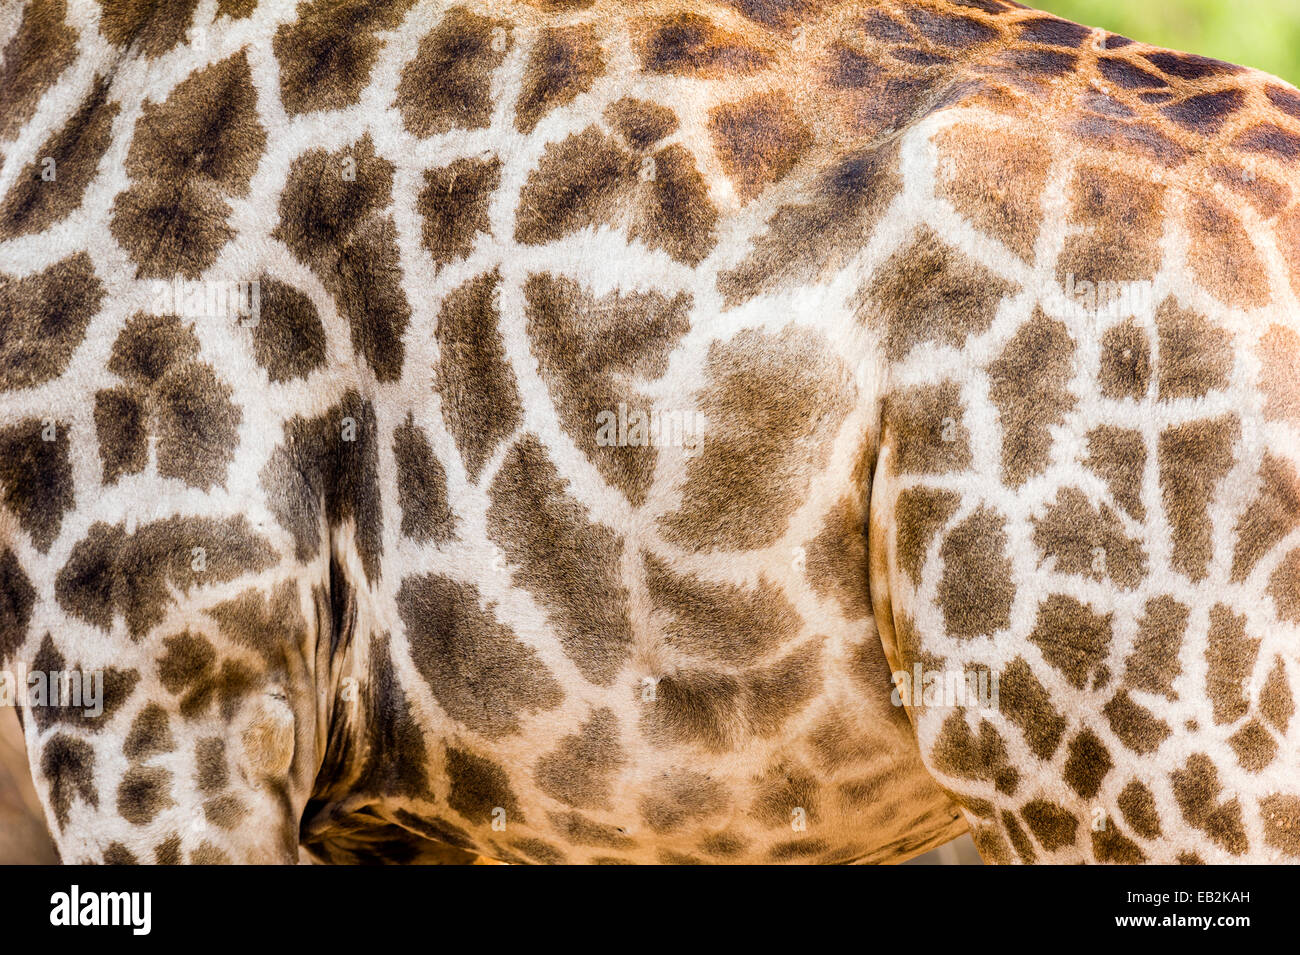 The mosaic hide and patterned skin of a Southern Reticulated Giraffe. Stock Photo